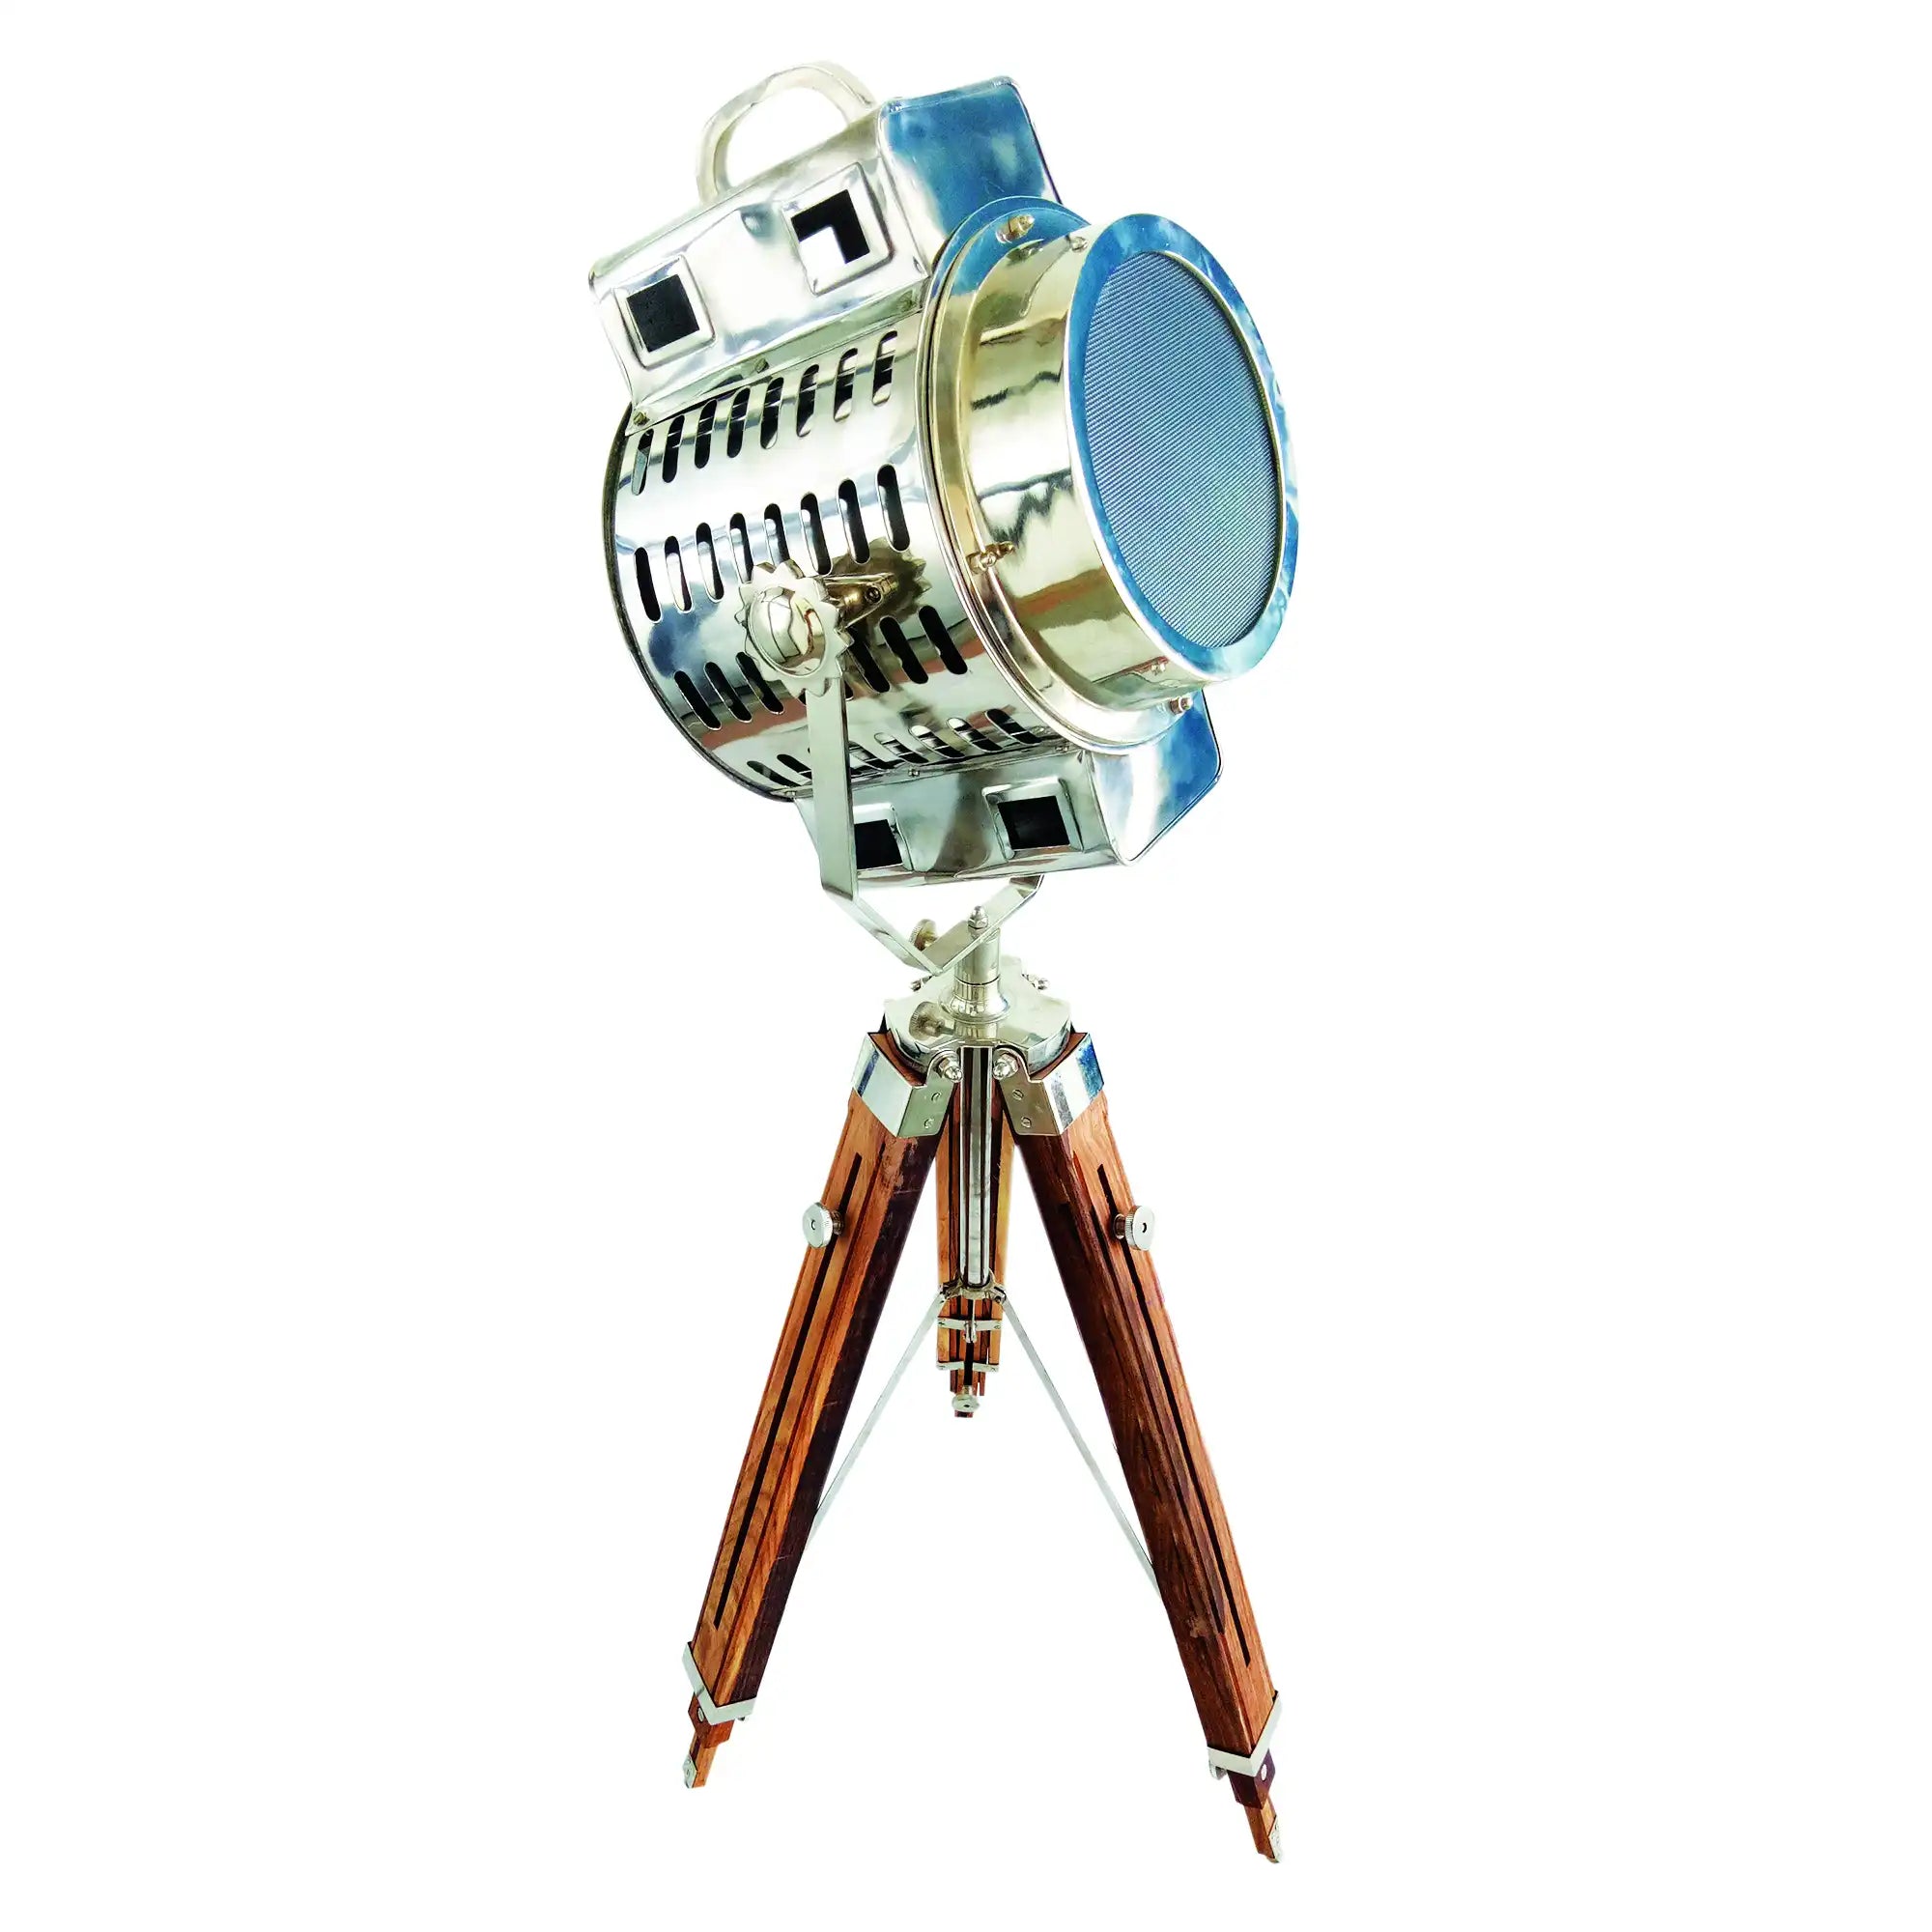 Nautical Searchlight Spotlight Royal Floor Lamp With Wooden Tripod Stand Home & Office Decor